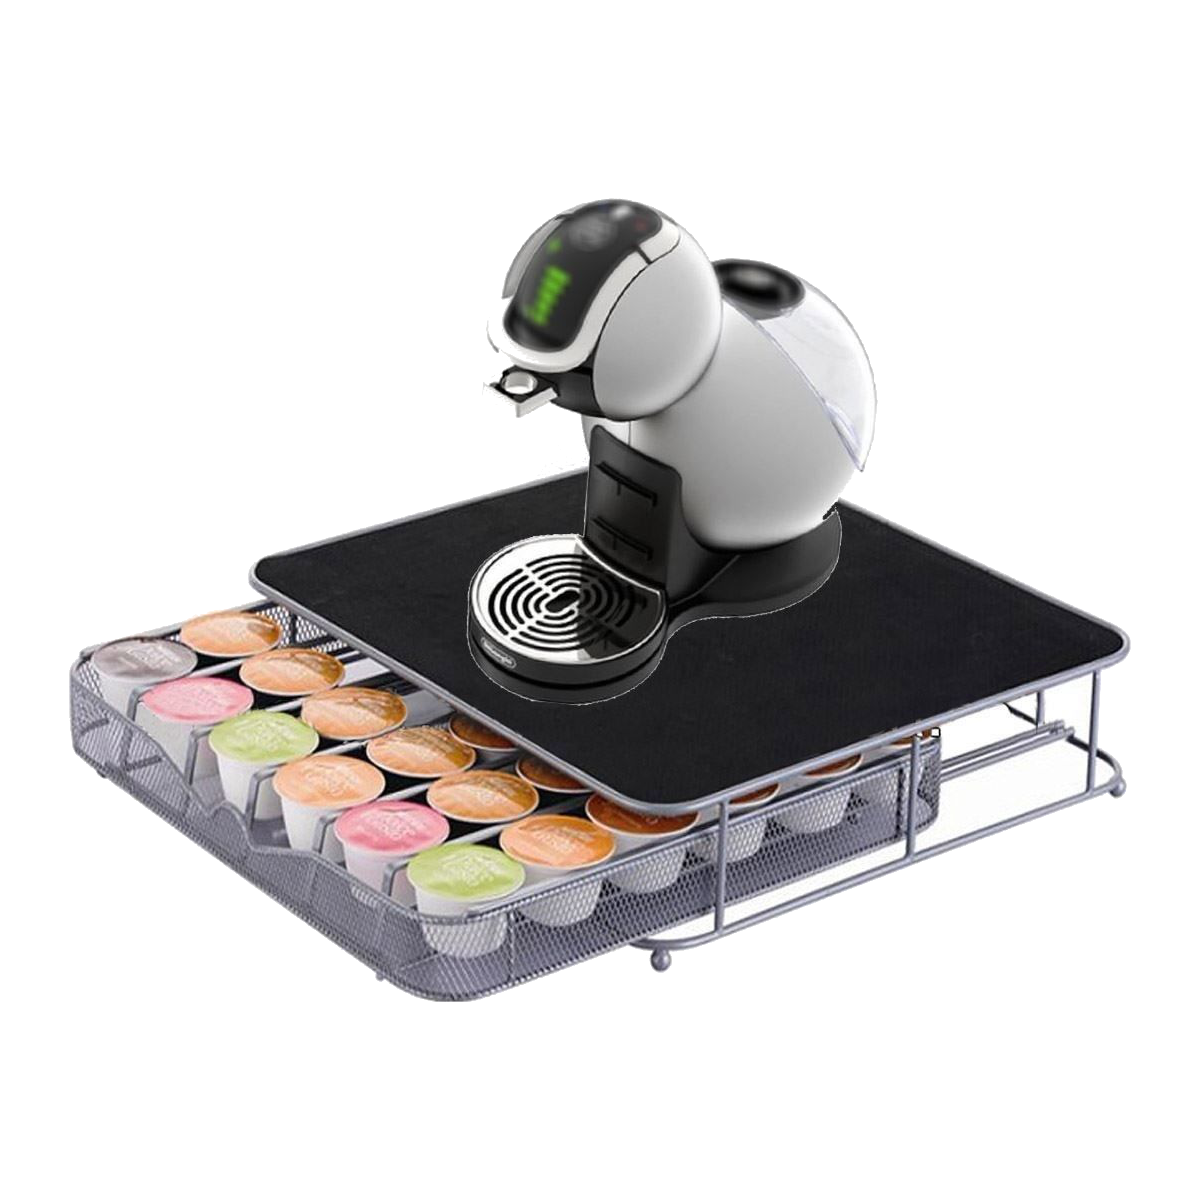 36 Dolce Gusto Pods Coffee Parts Storage Box Drawer Stand Holder Capsule Pods For Coffee Maker